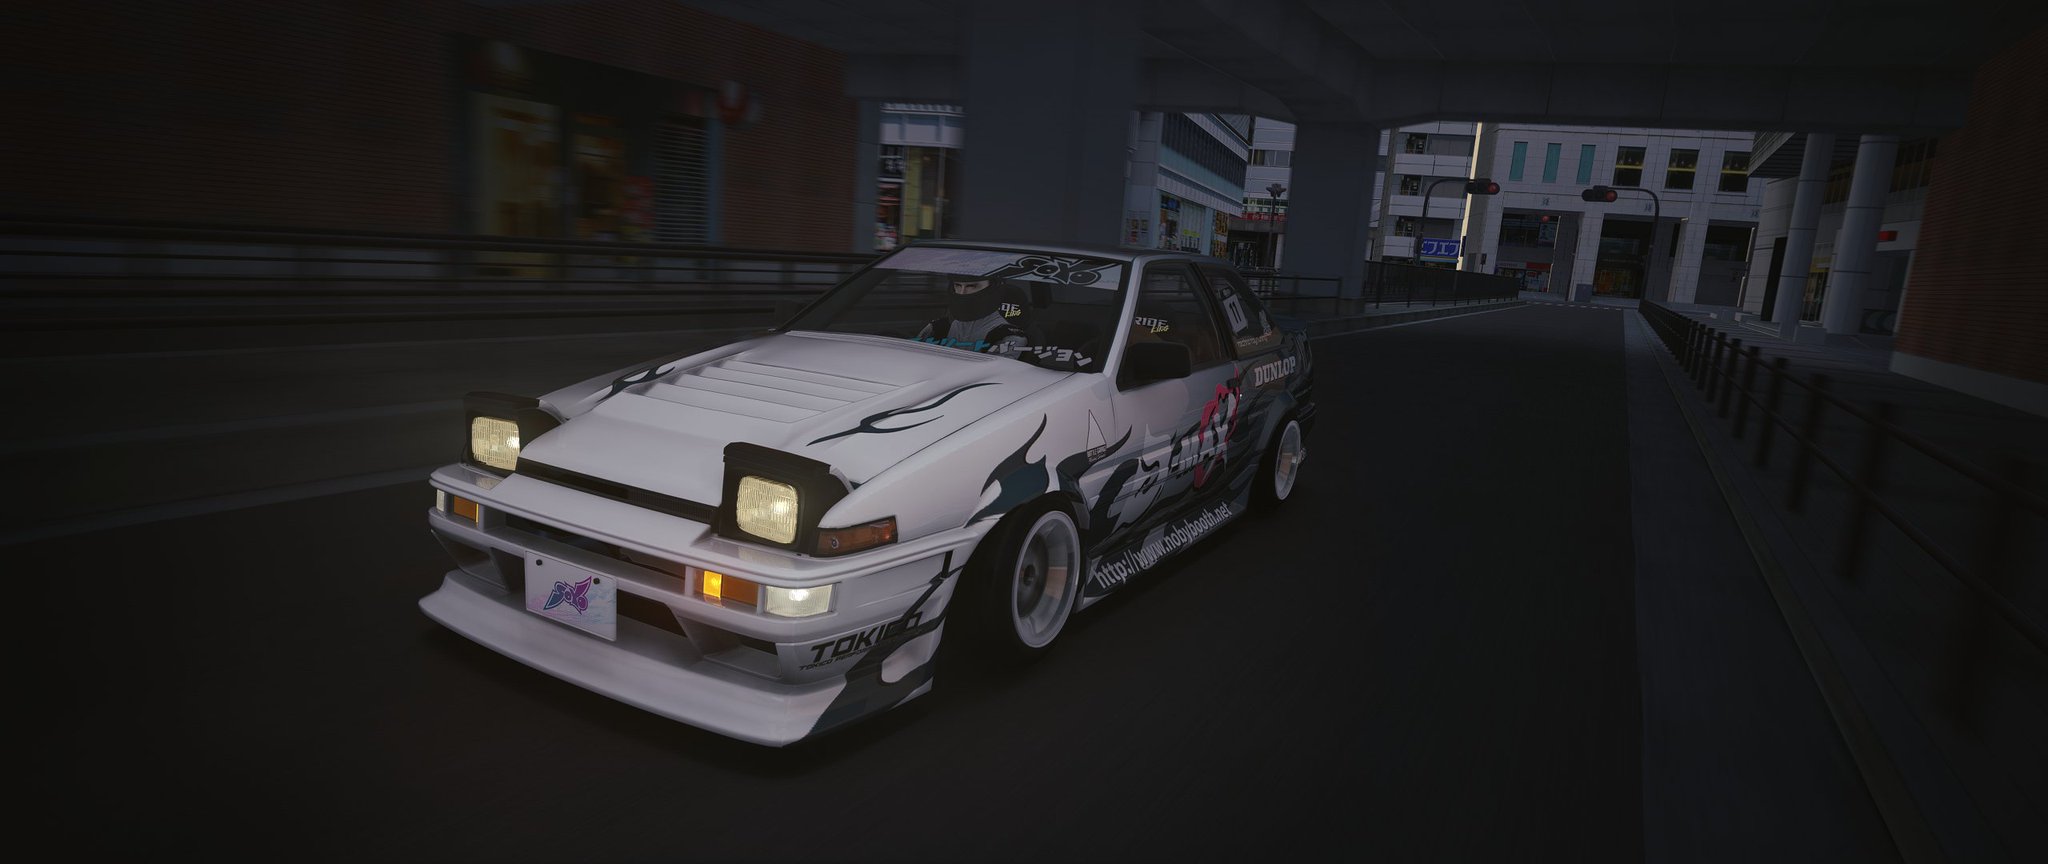 Soyo On Twitter Some Screenshots Of My Wip Ae86 Coupe On My Newest Track Update Assettocorsa アセットコルサ